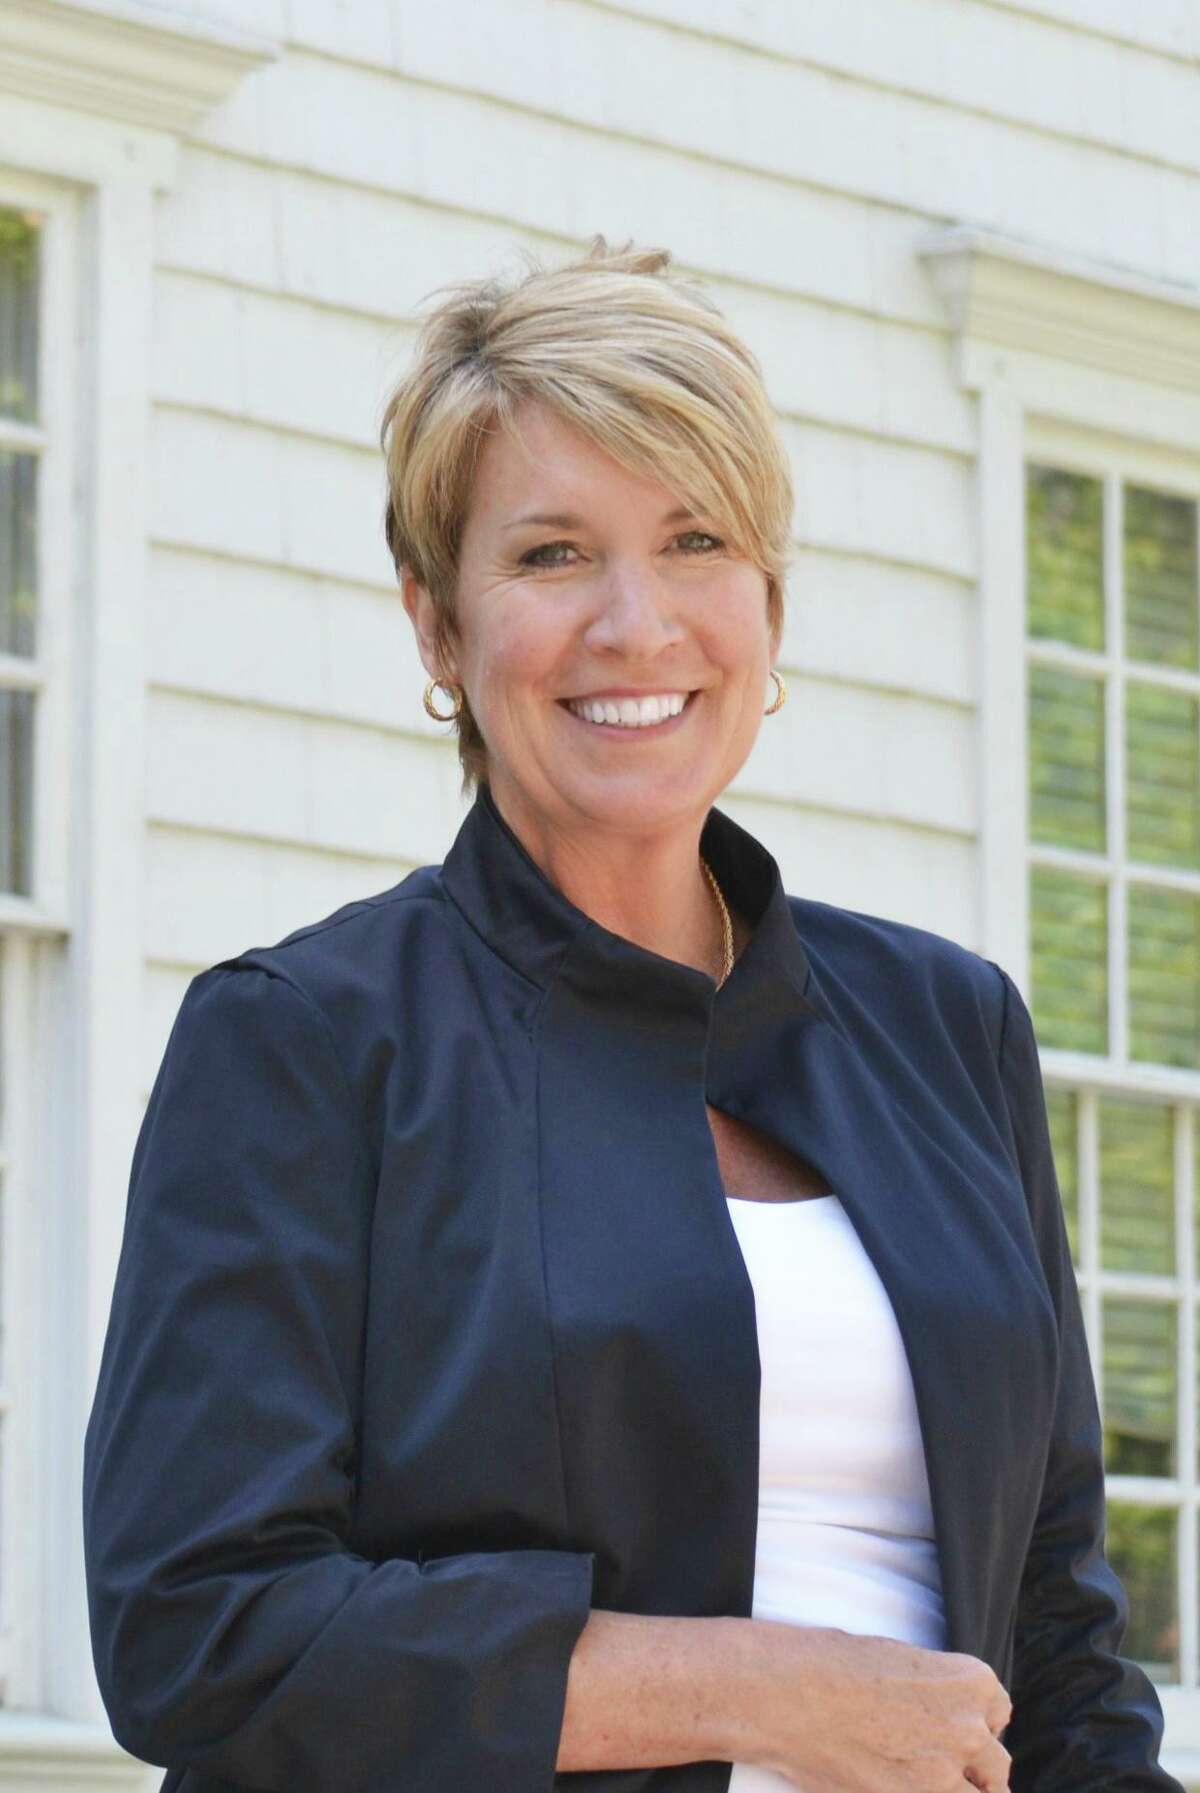 Fourth-term state Rep. Laura Devlin, R-Fairfield, is scheduled to be nominated on Friday night to be Bob Stefanowski’s lieutenant governor running mate.